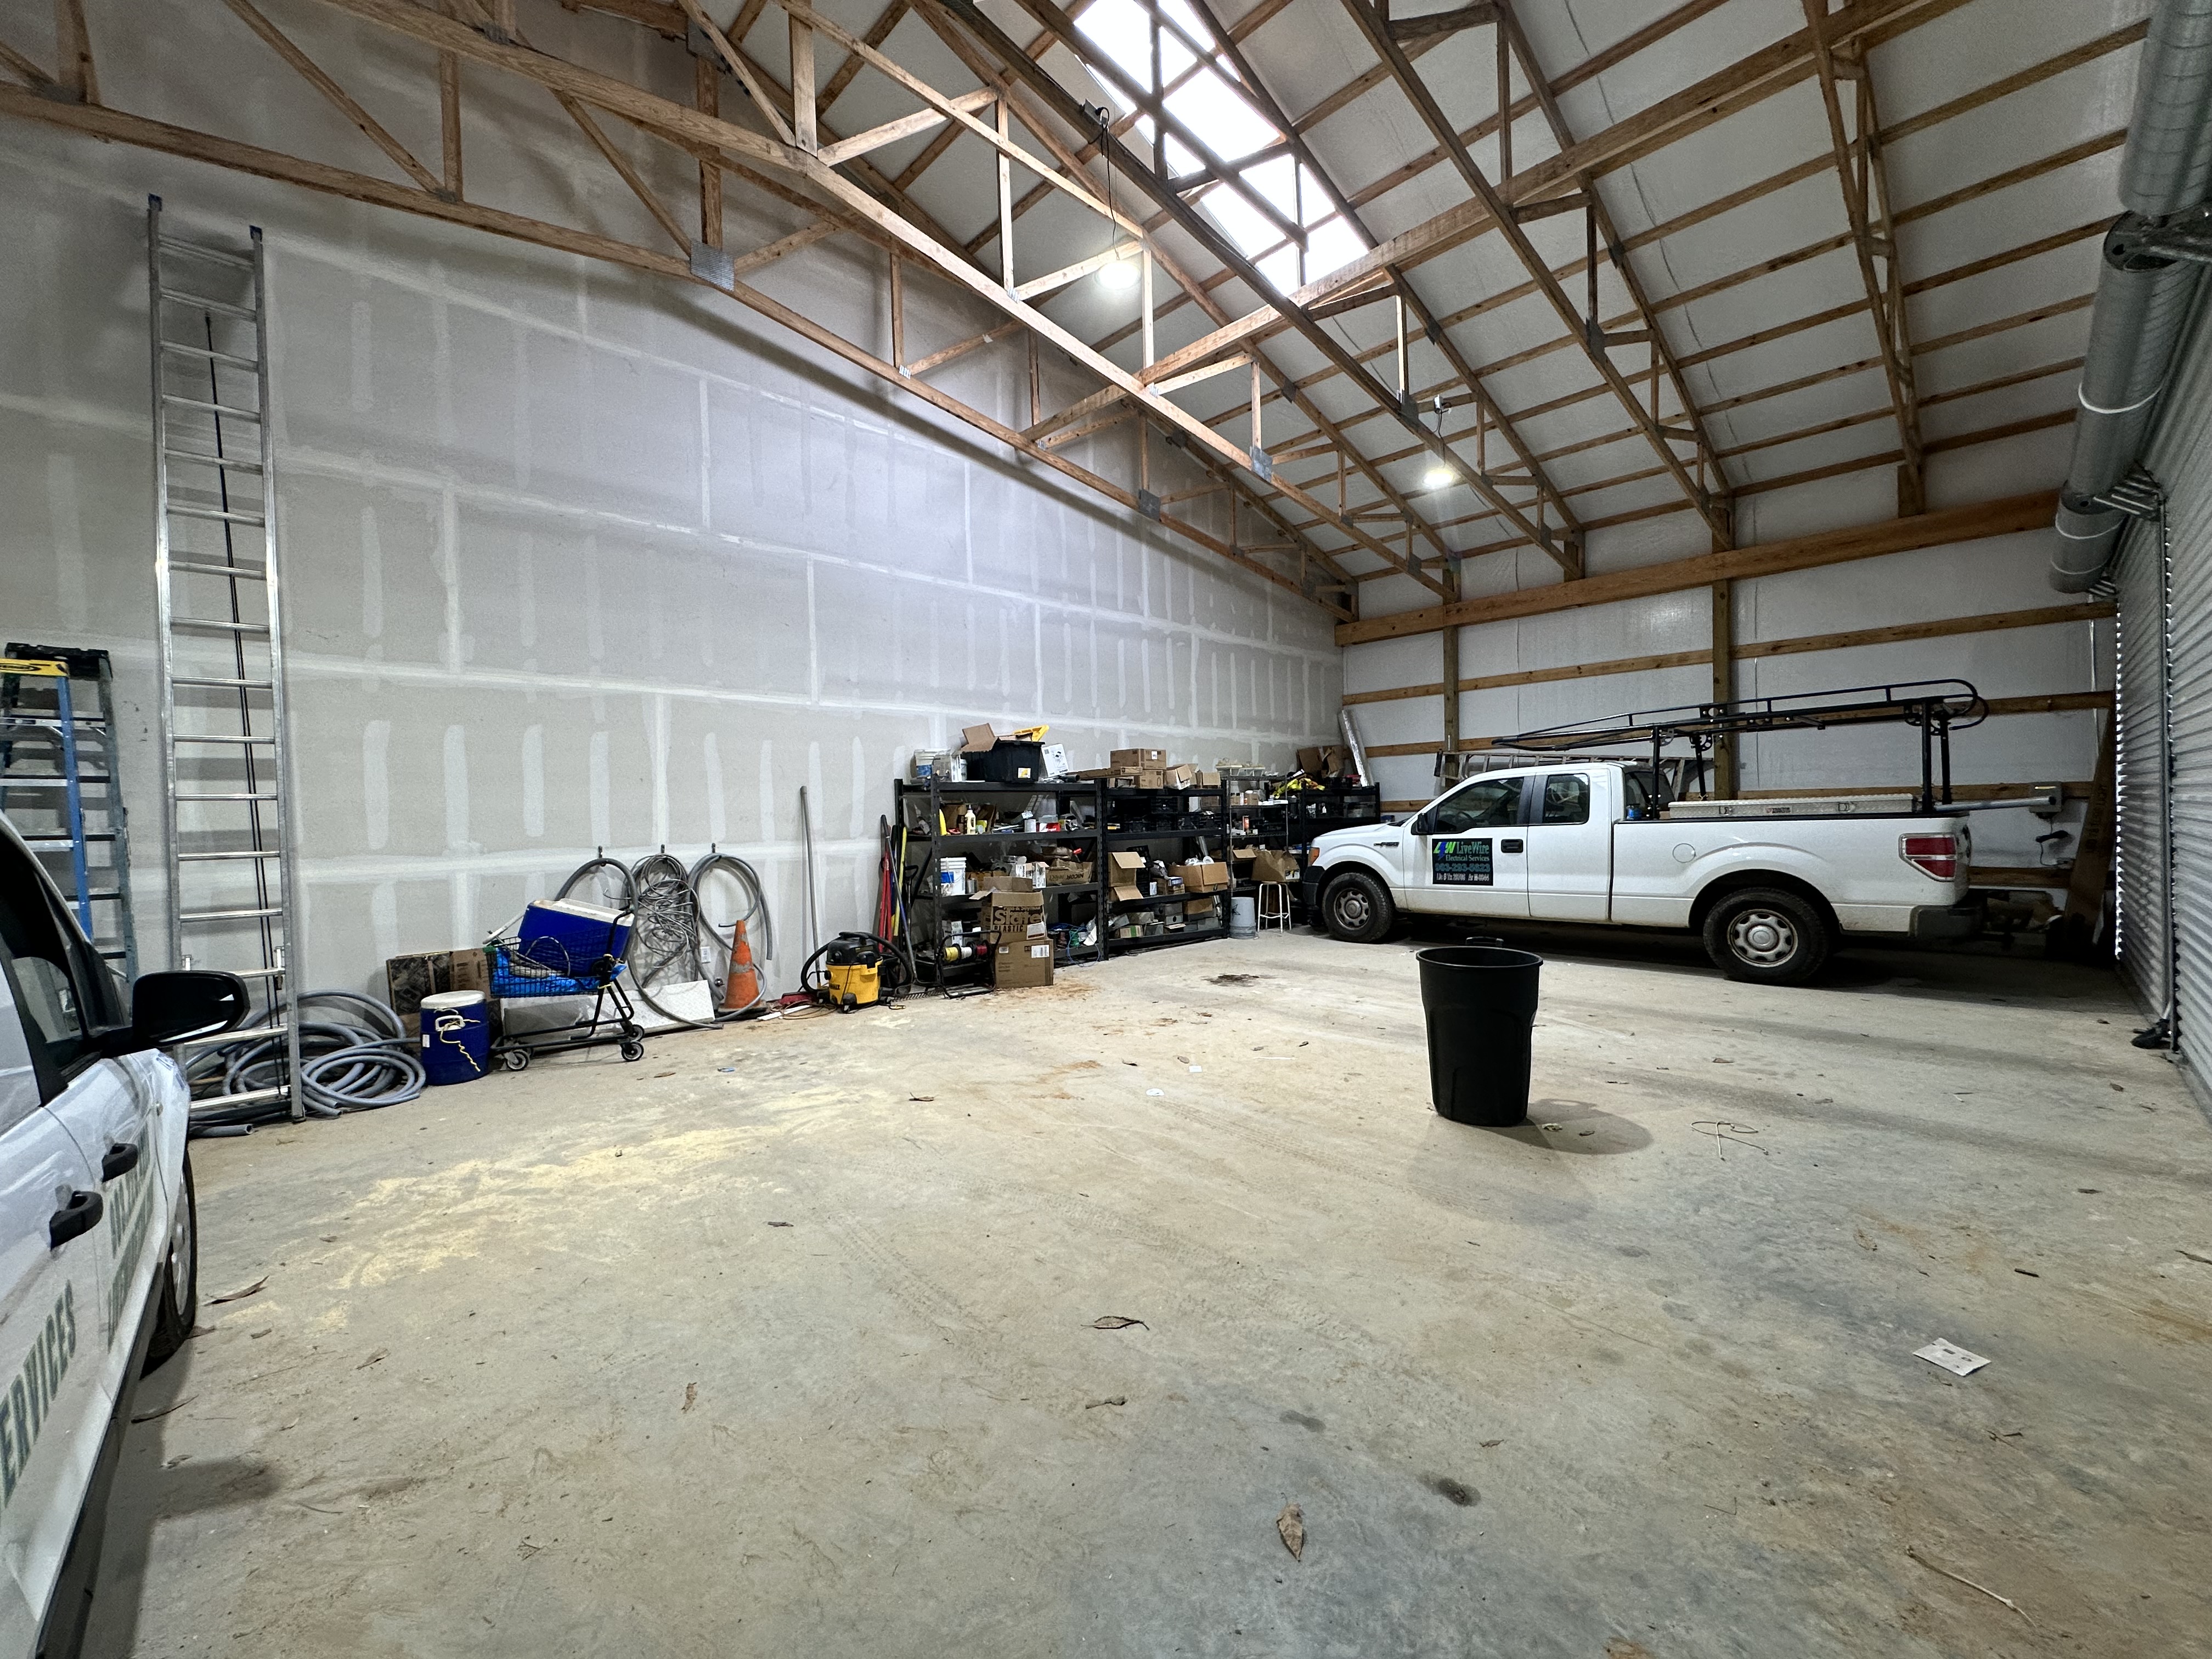 Garage bay area that is not climate controlled. 1,410 square feet to park or store product. 